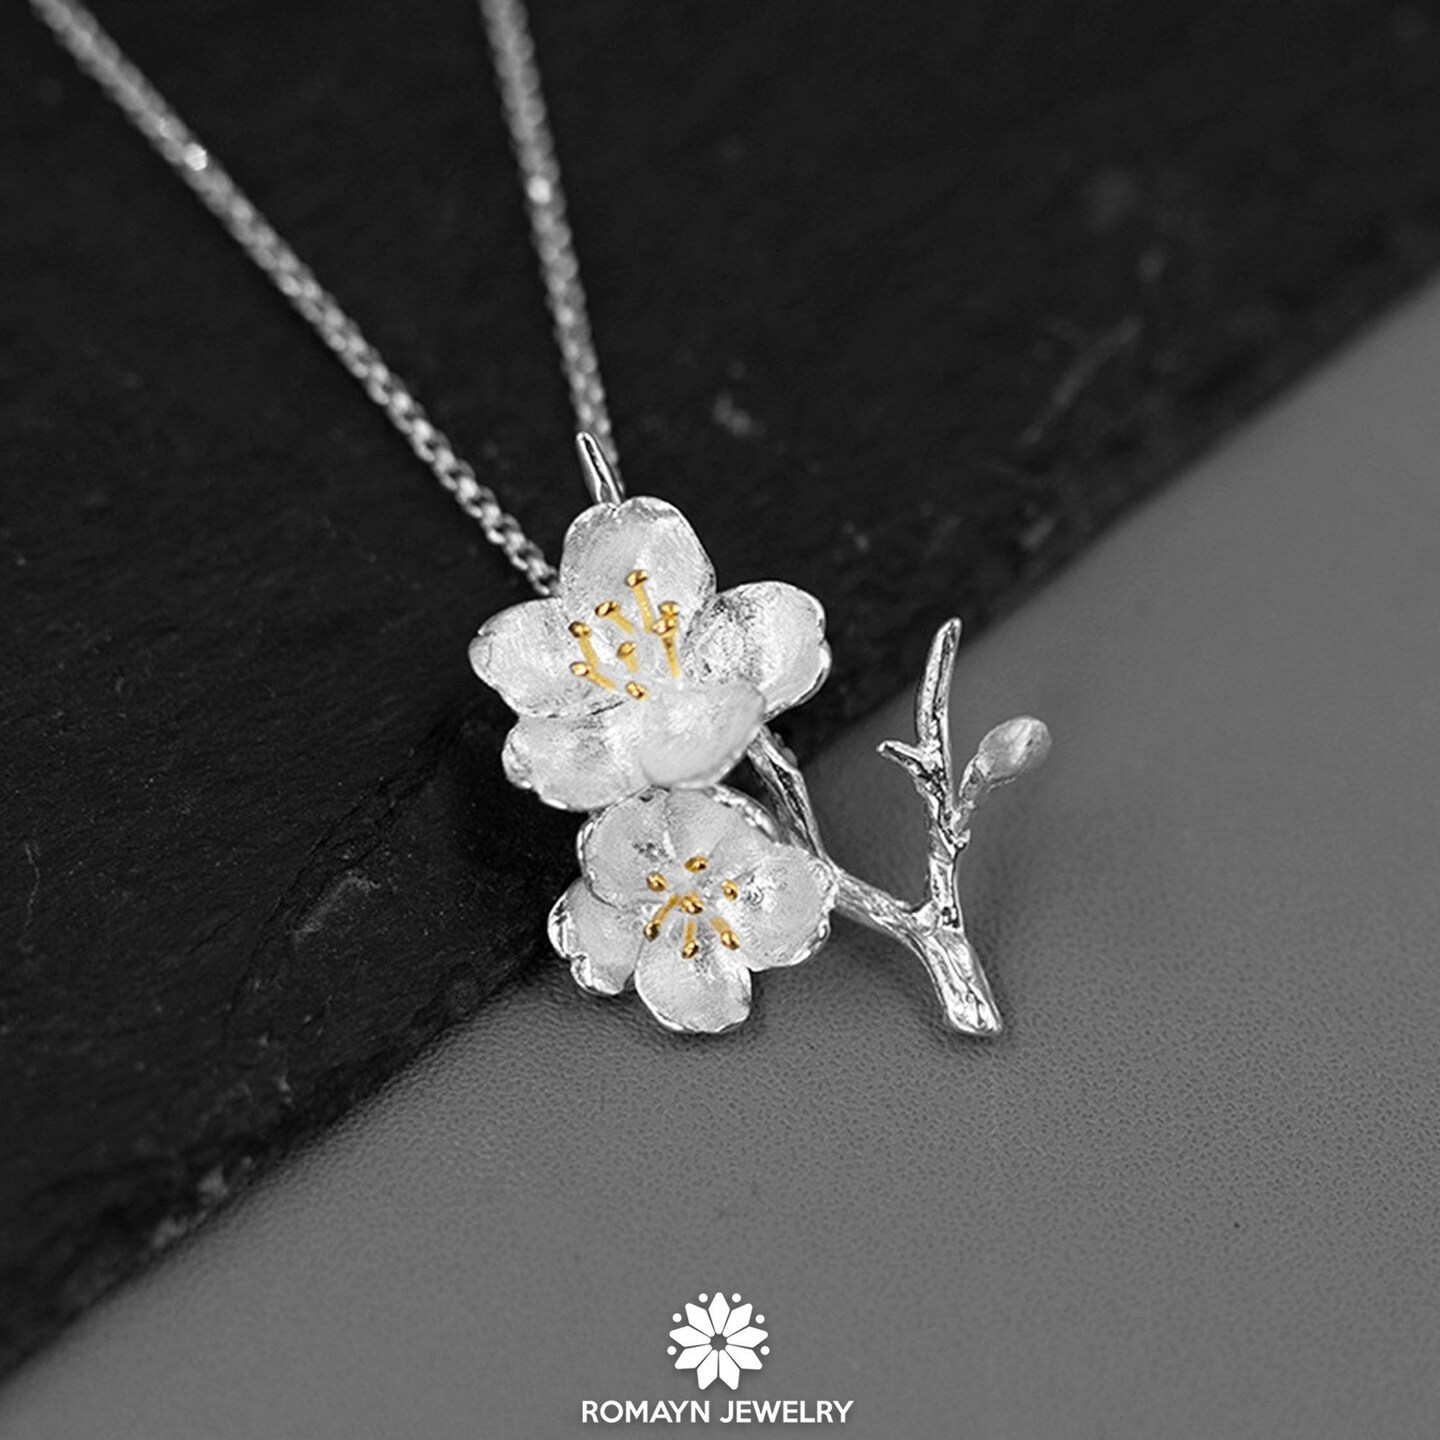 Buy VIVANILLA Cherry Blossom Pendant Necklace for Women and Girls Simple  Shining Zircon Flower Neckchain Jewellery for Best Friends Girlfriend Ideal  Birthday Gift Giving (Gold) at Amazon.in